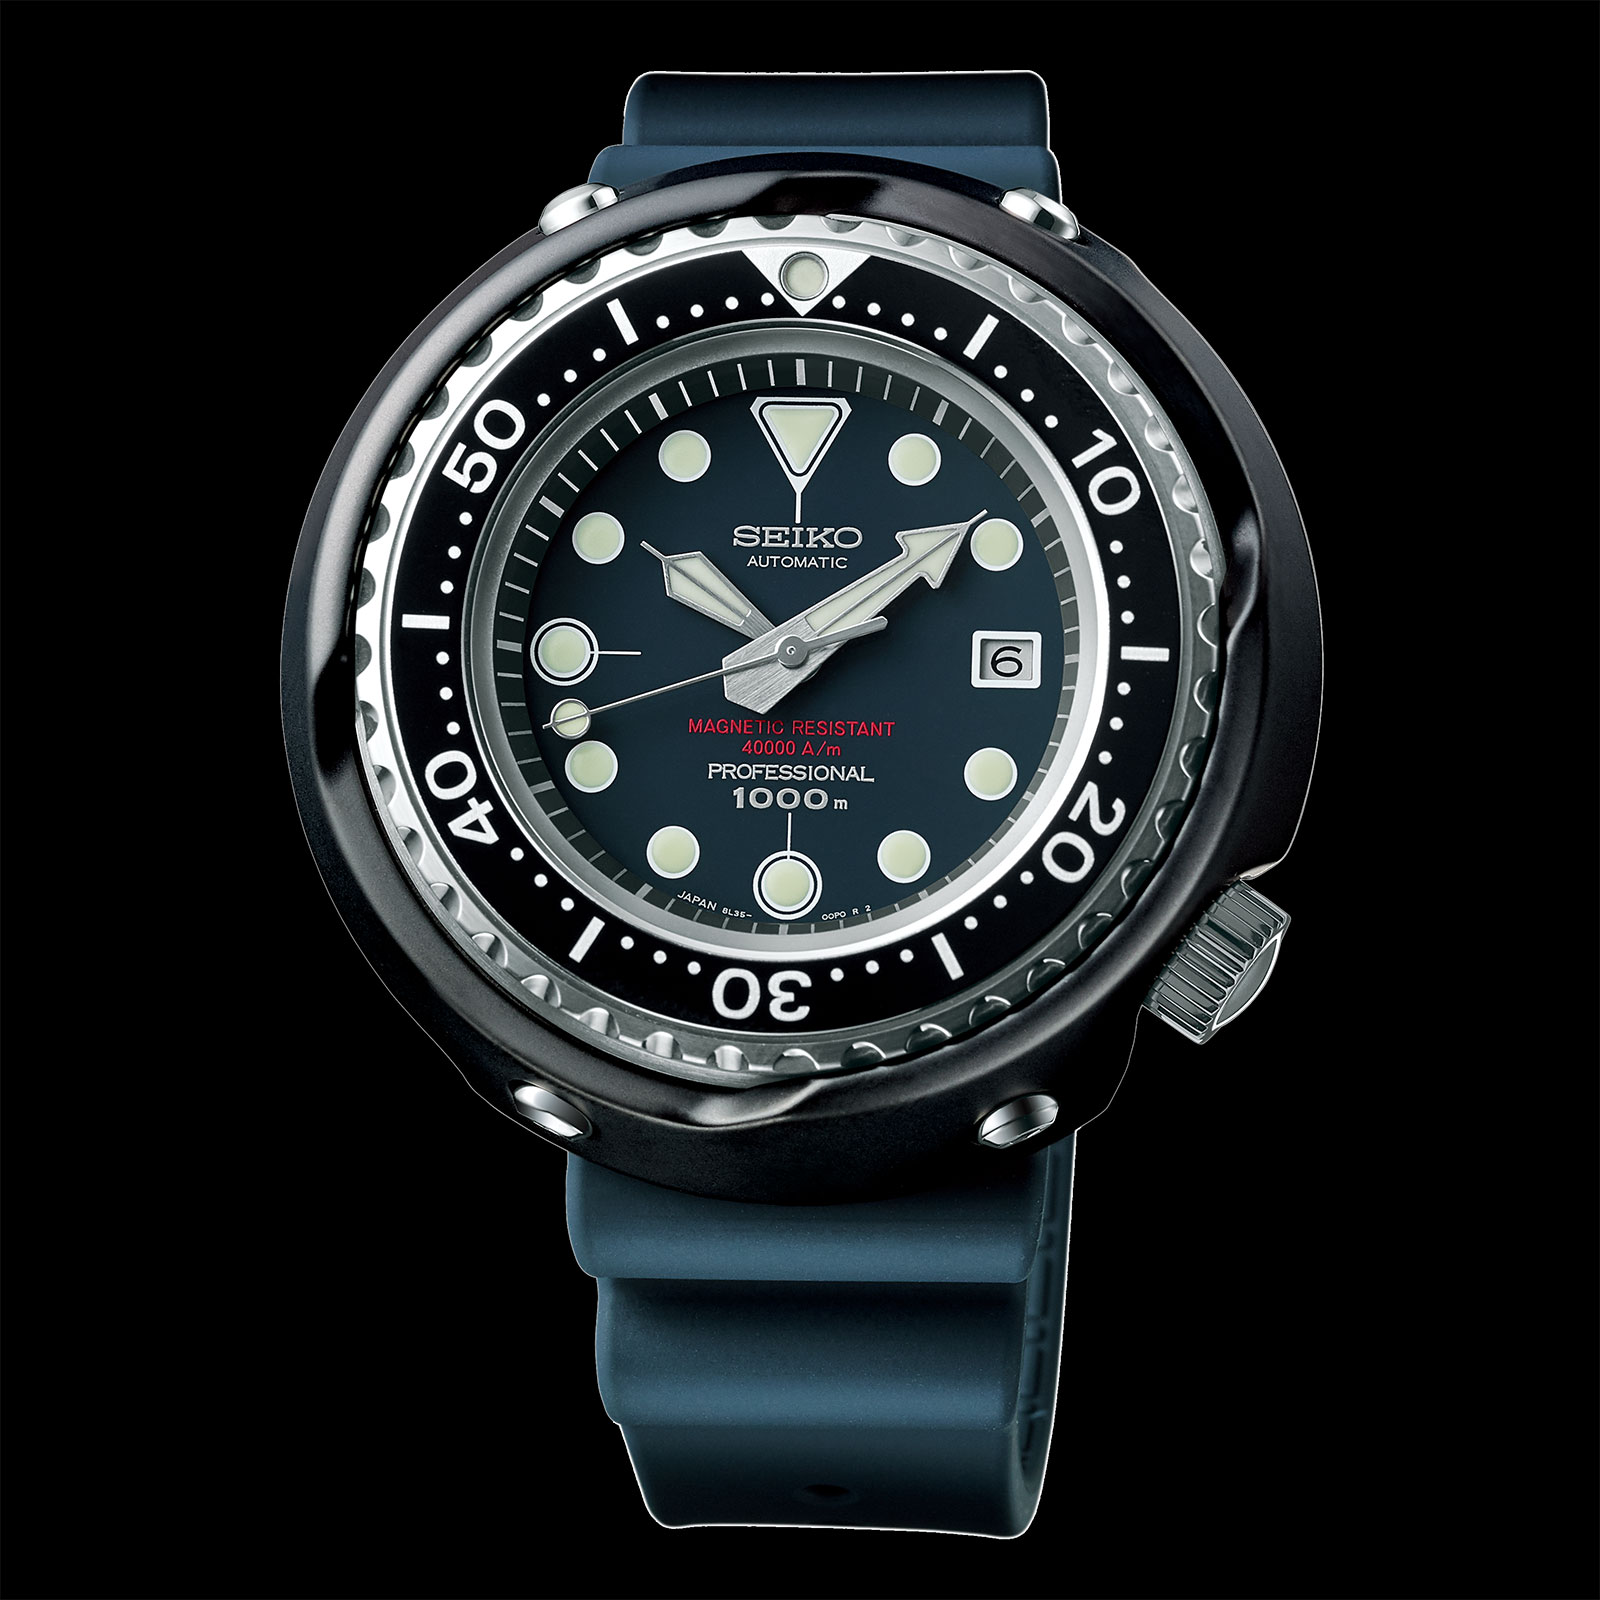 Seiko Introduces the Diver's Watch 55th Anniversary Trilogy | SJX Watches